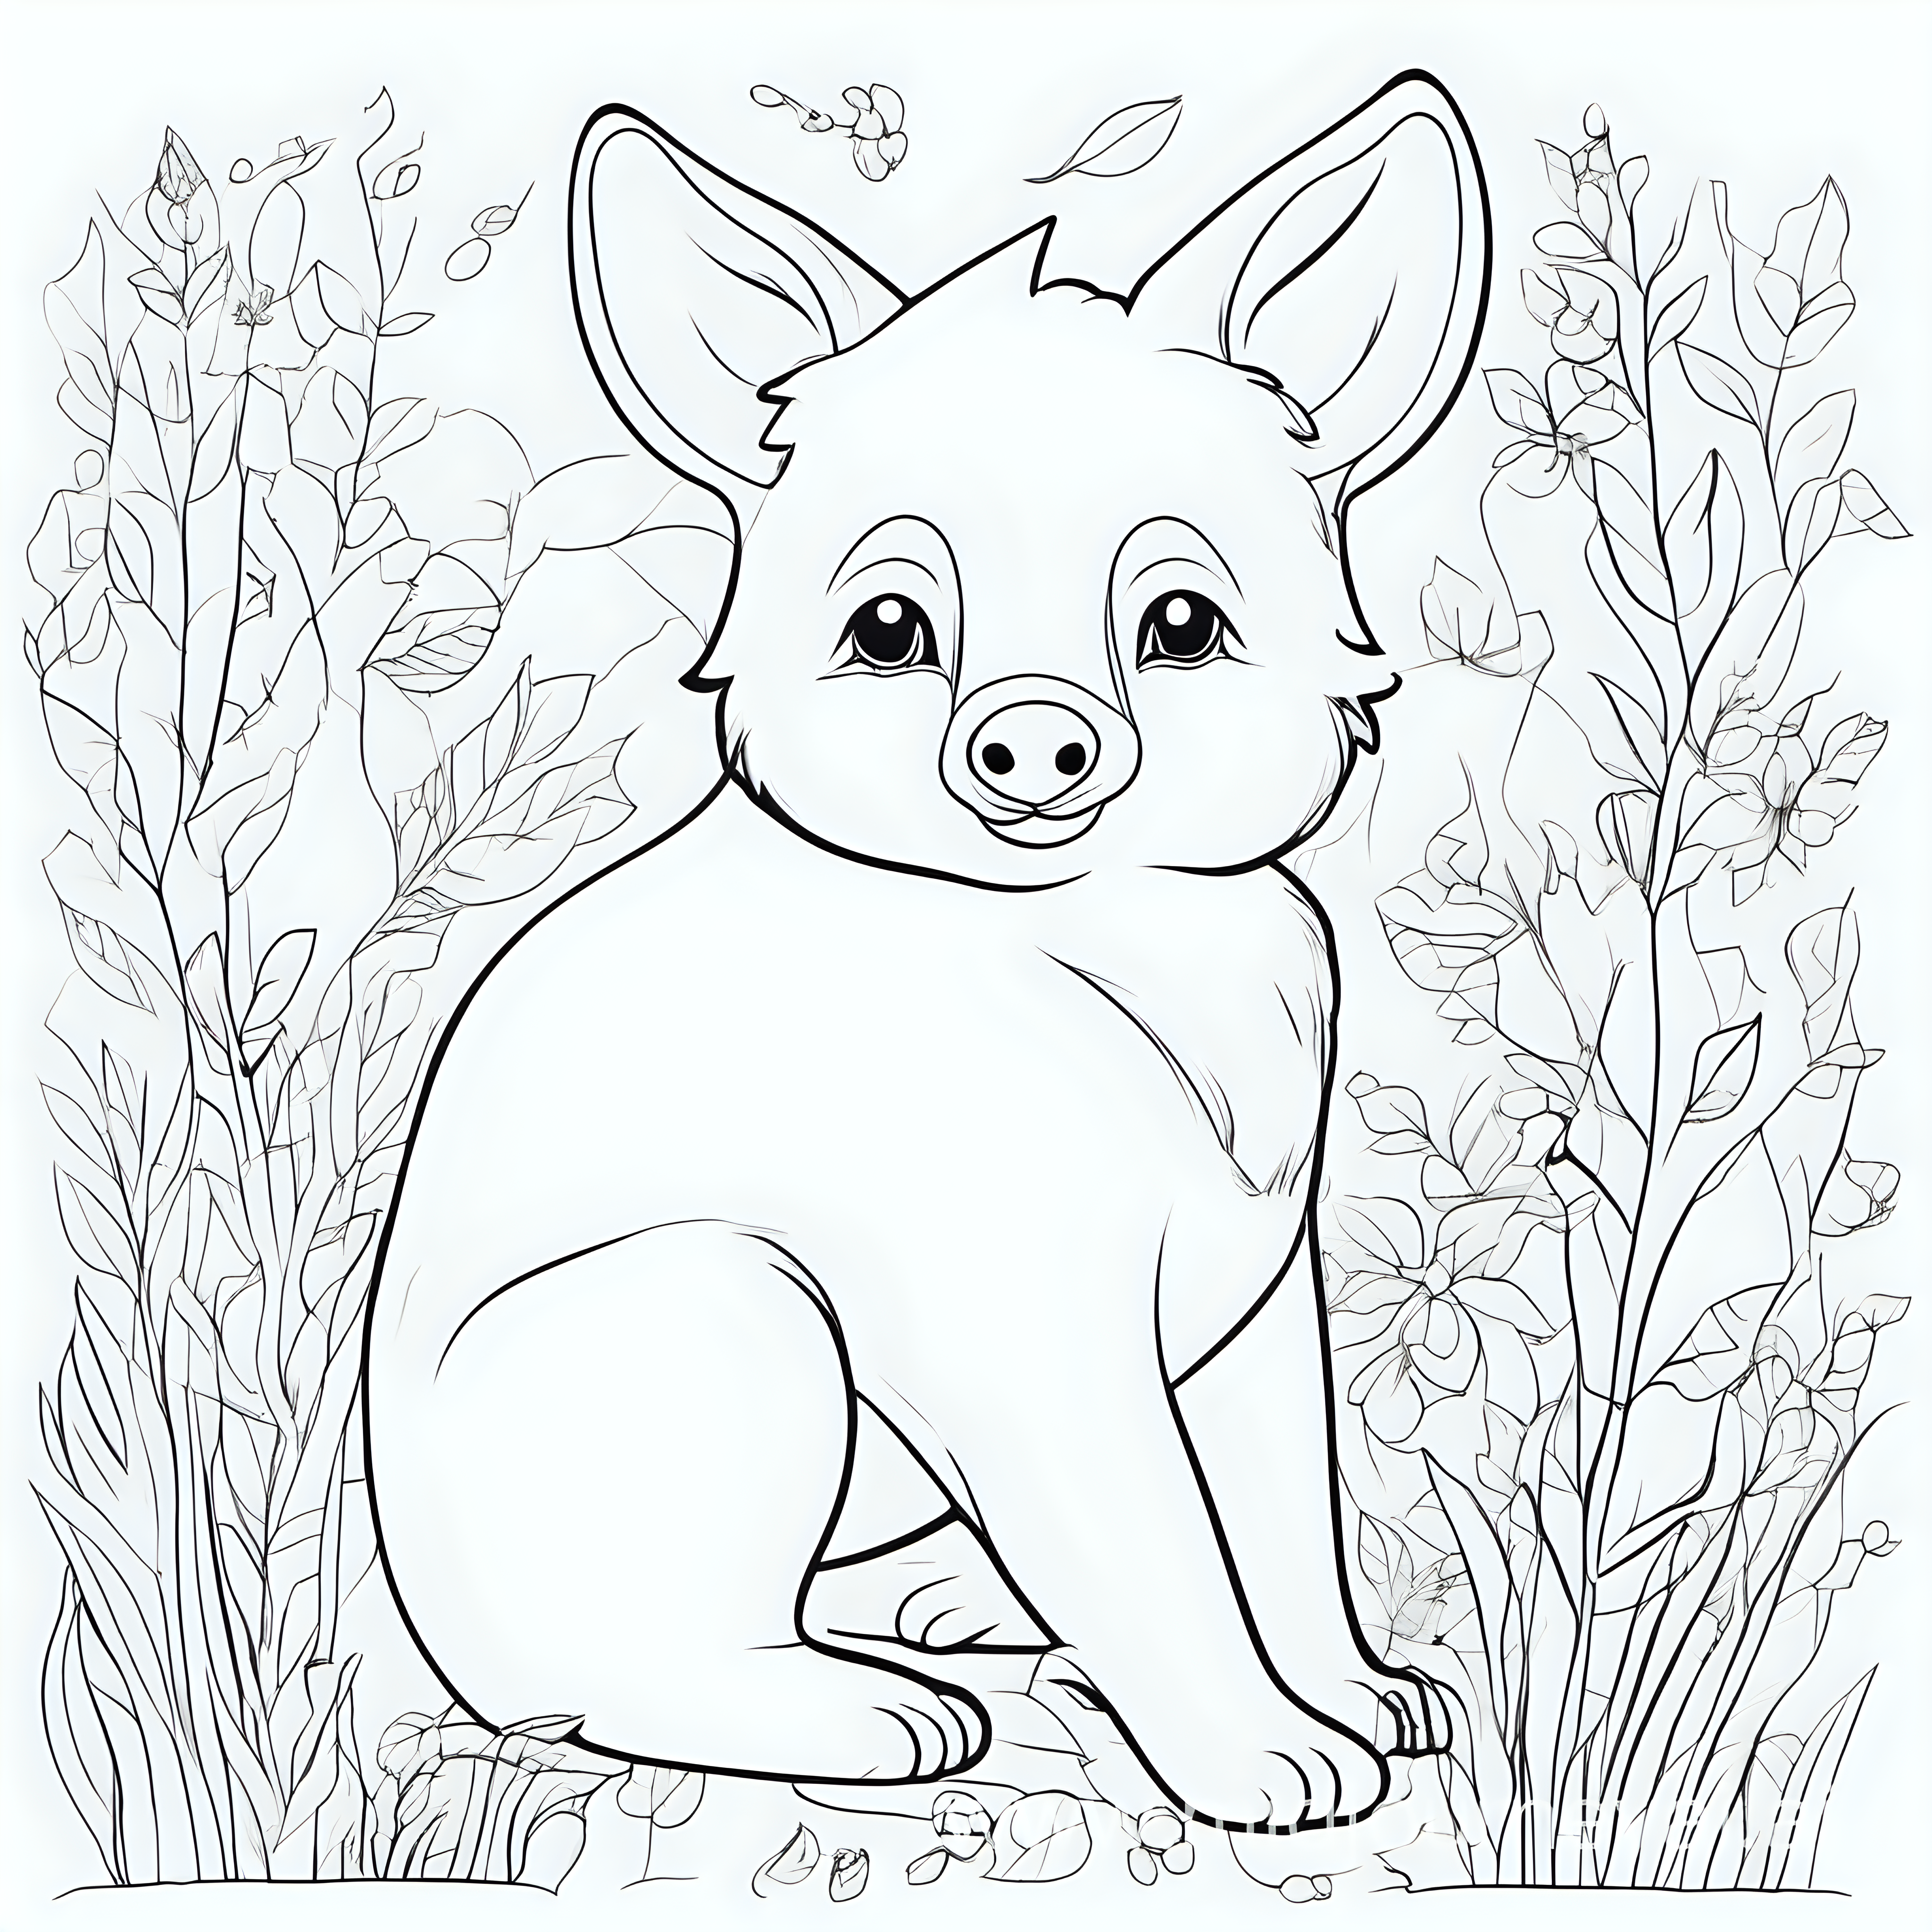 draw unique cute animals with only the outline in back for a coloring book